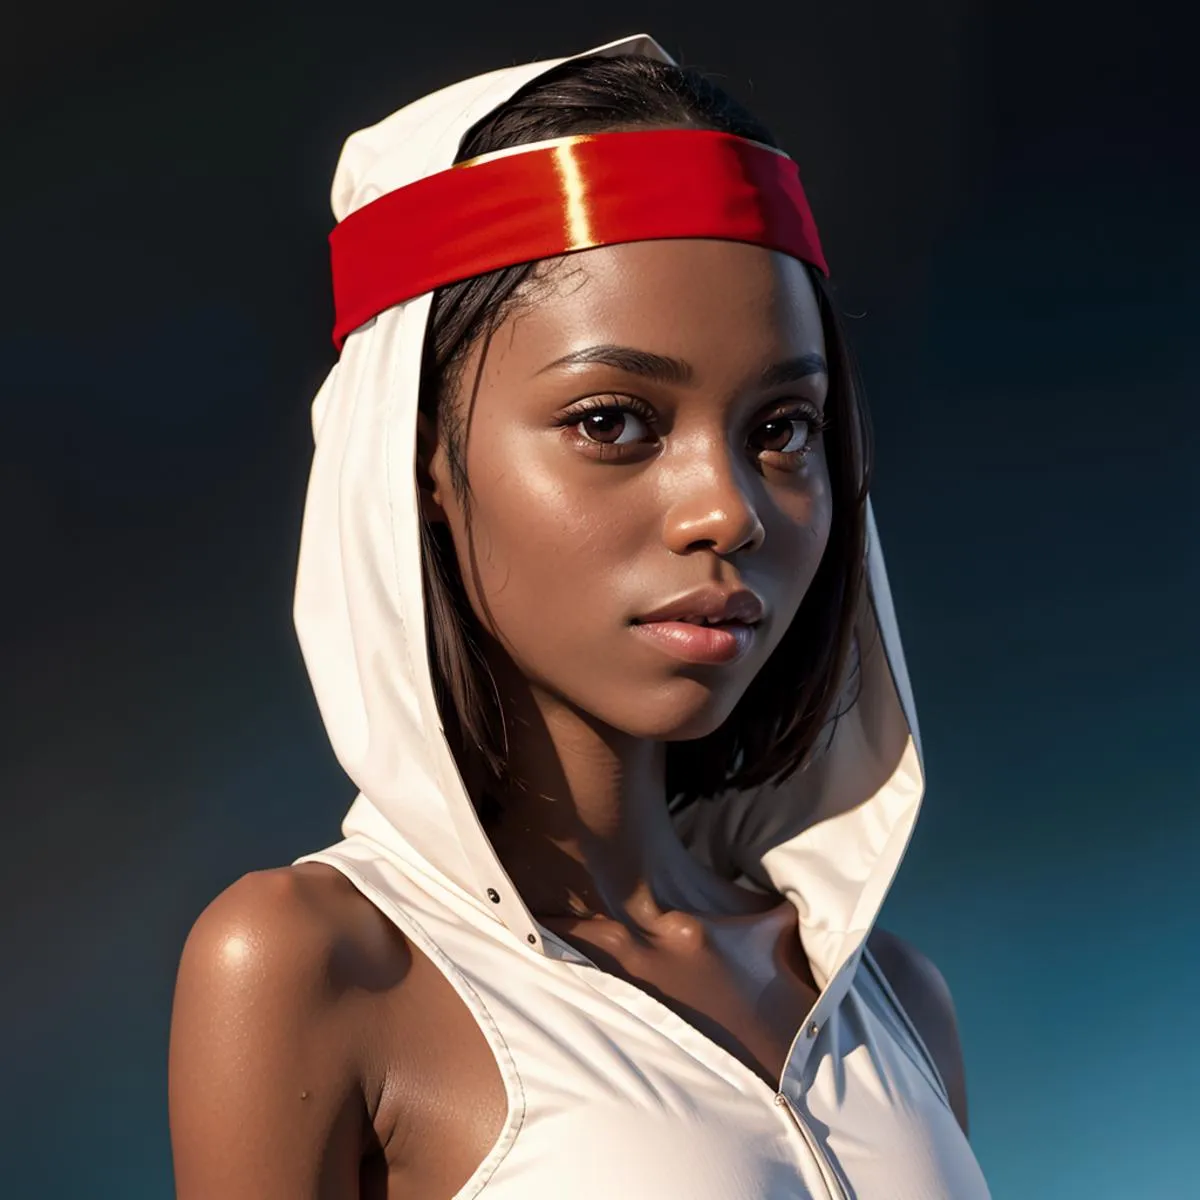 AI generated image of a young woman with a red headband, wearing a sleeveless white hooded top, created using stable diffusion.